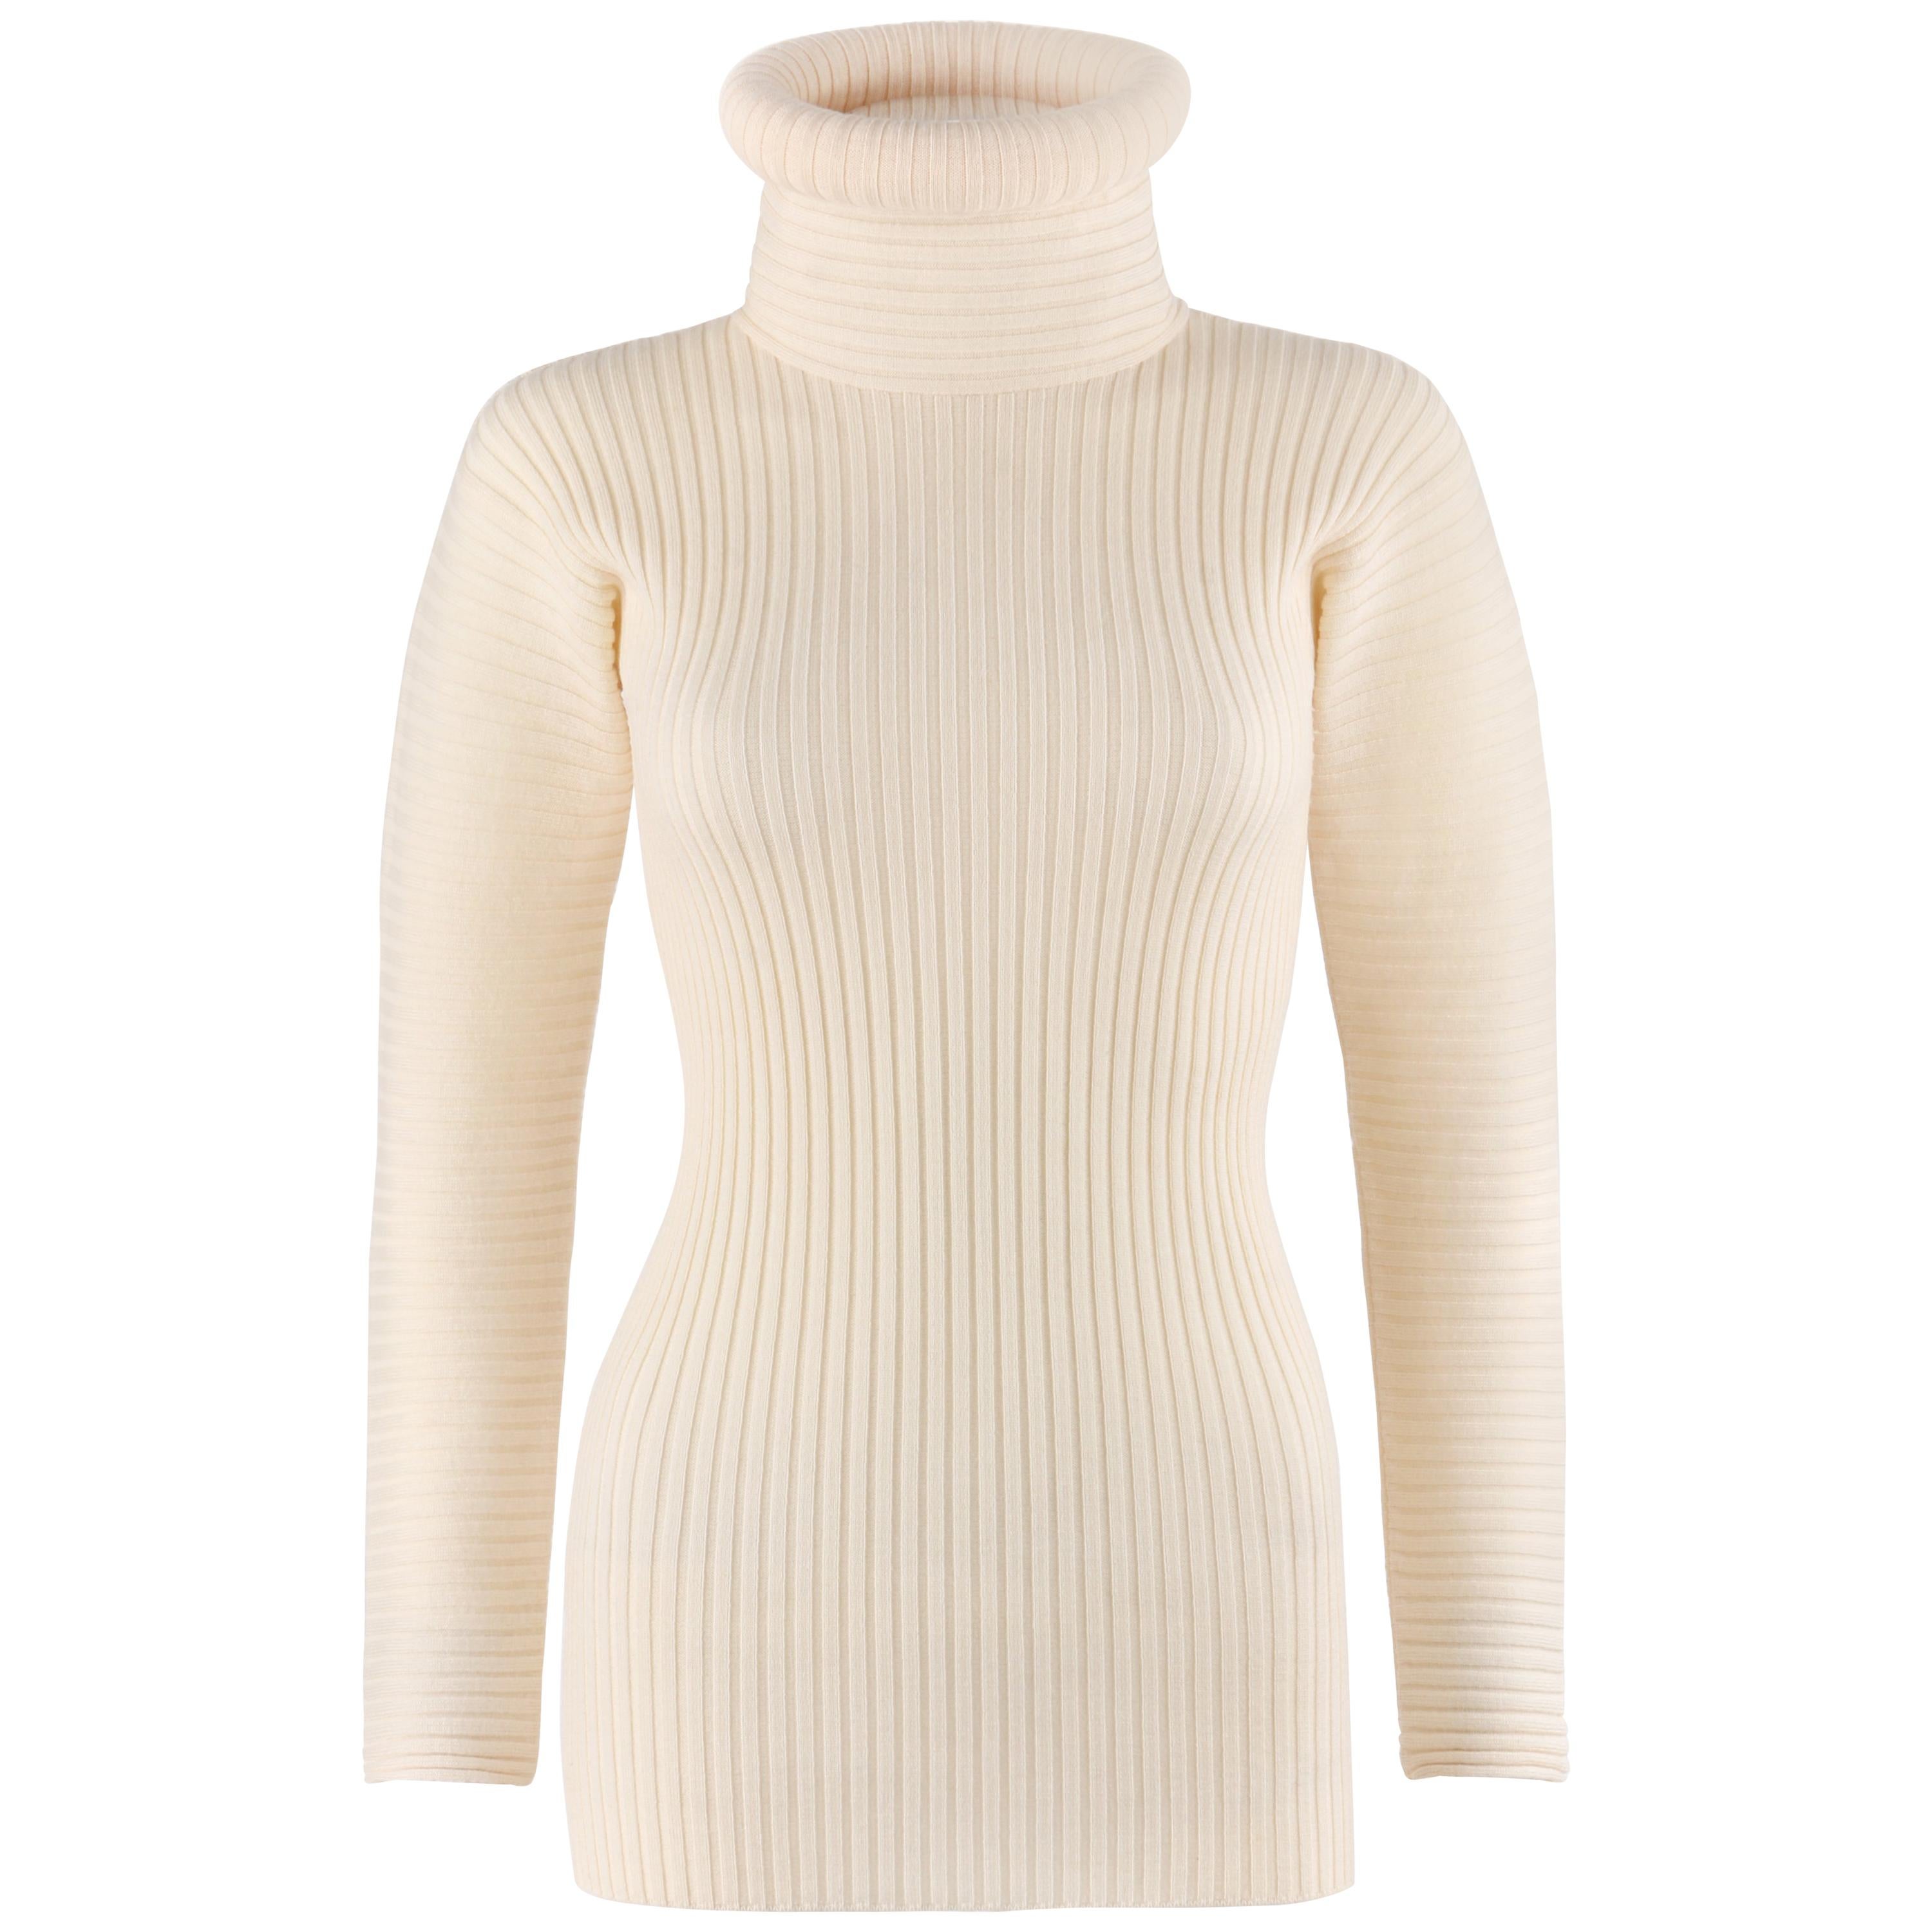 JEAN PAUL GAULTIER Mailie c.1990’s Ivory Turtleneck Ribbed Knit Wool Sweater